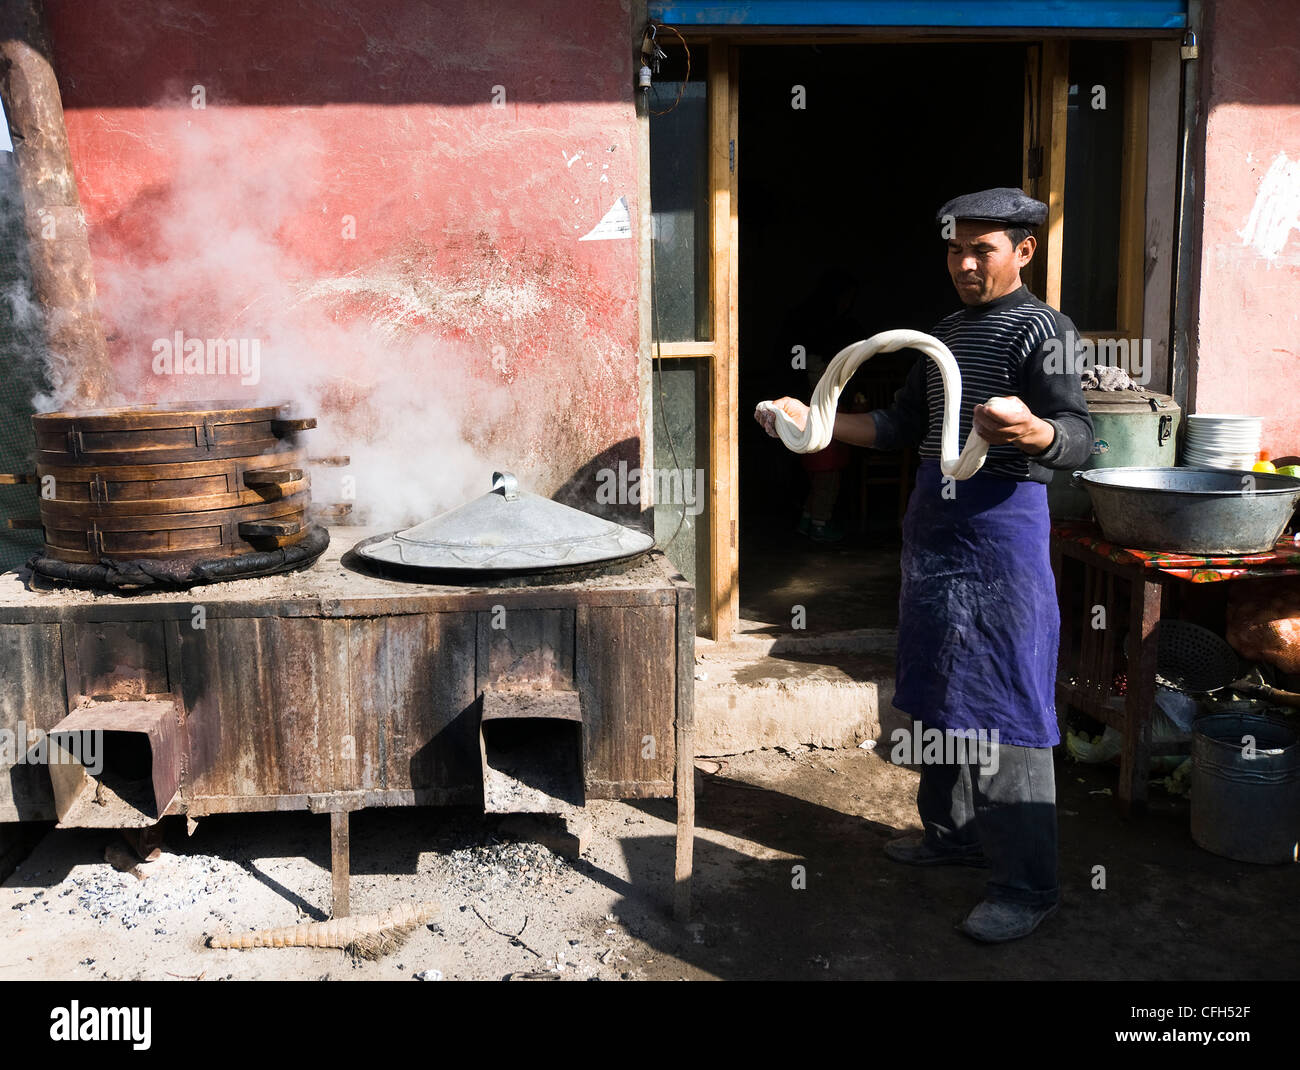 Hand Pulled Noodles ( Lamien or Lagman ) being prepared by a cook in a small street restaurant in Xinjiang, China. Stock Photo